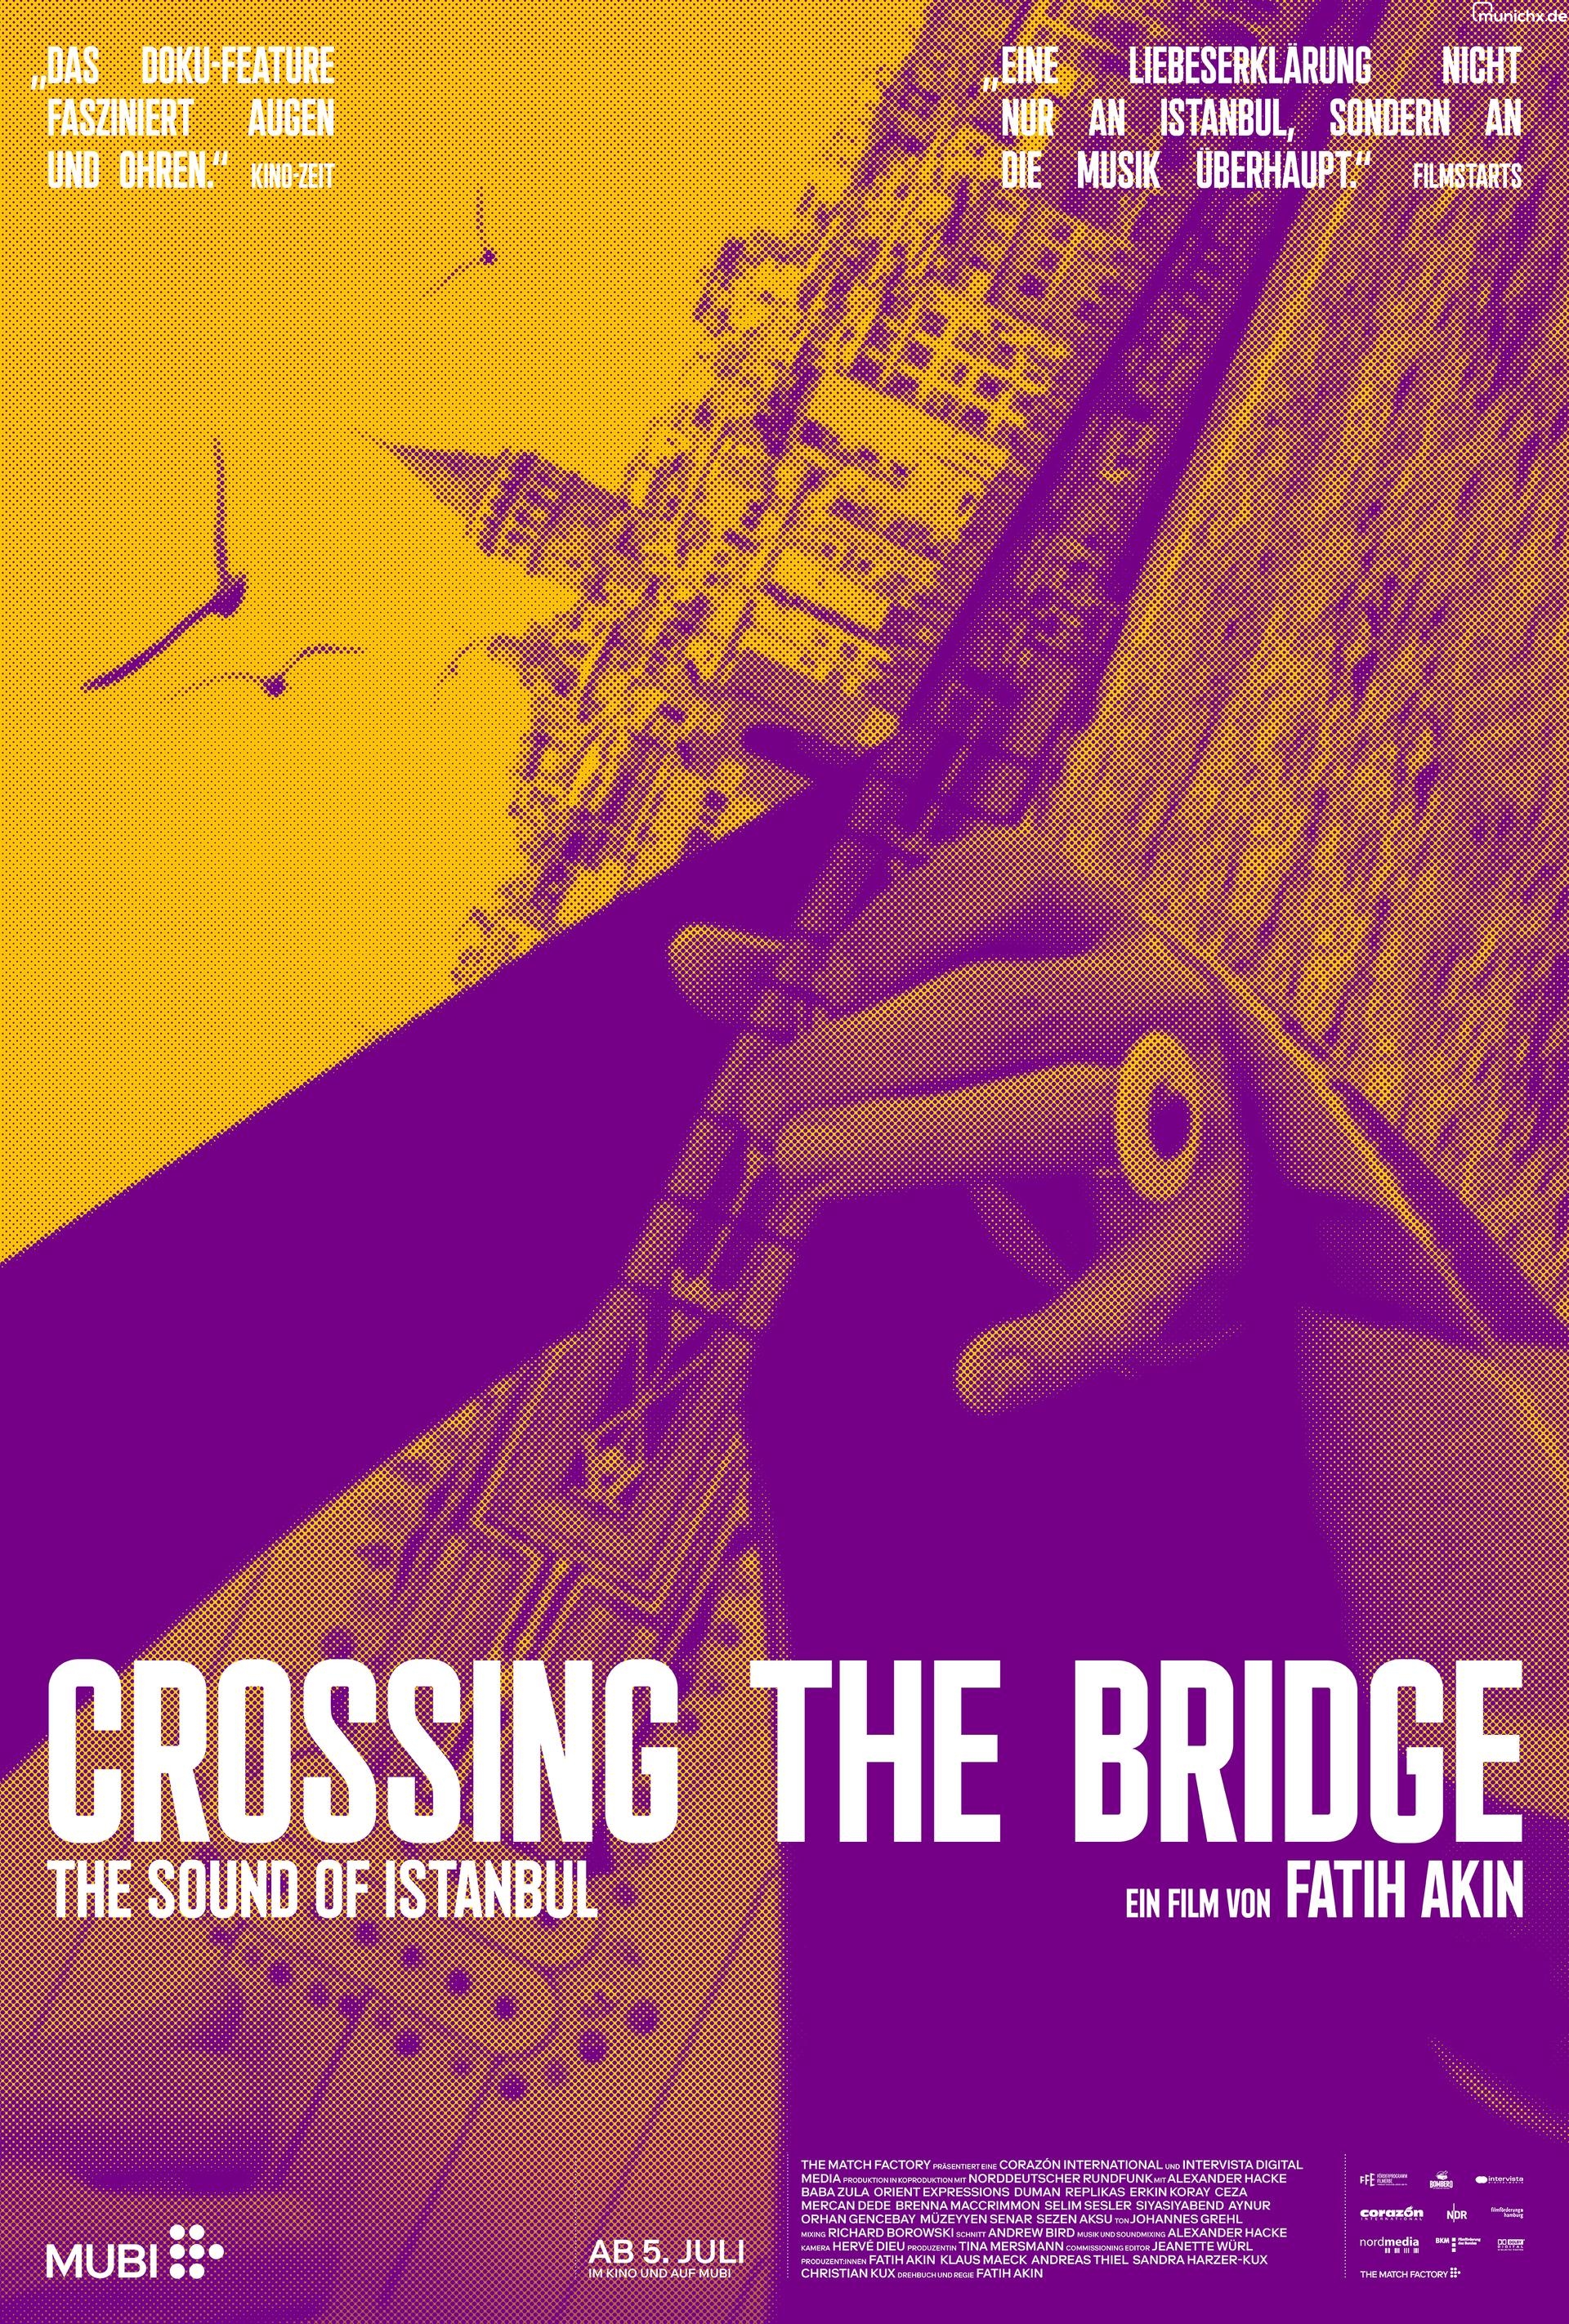 Crossing the Bridge - The Sound of Istanbul